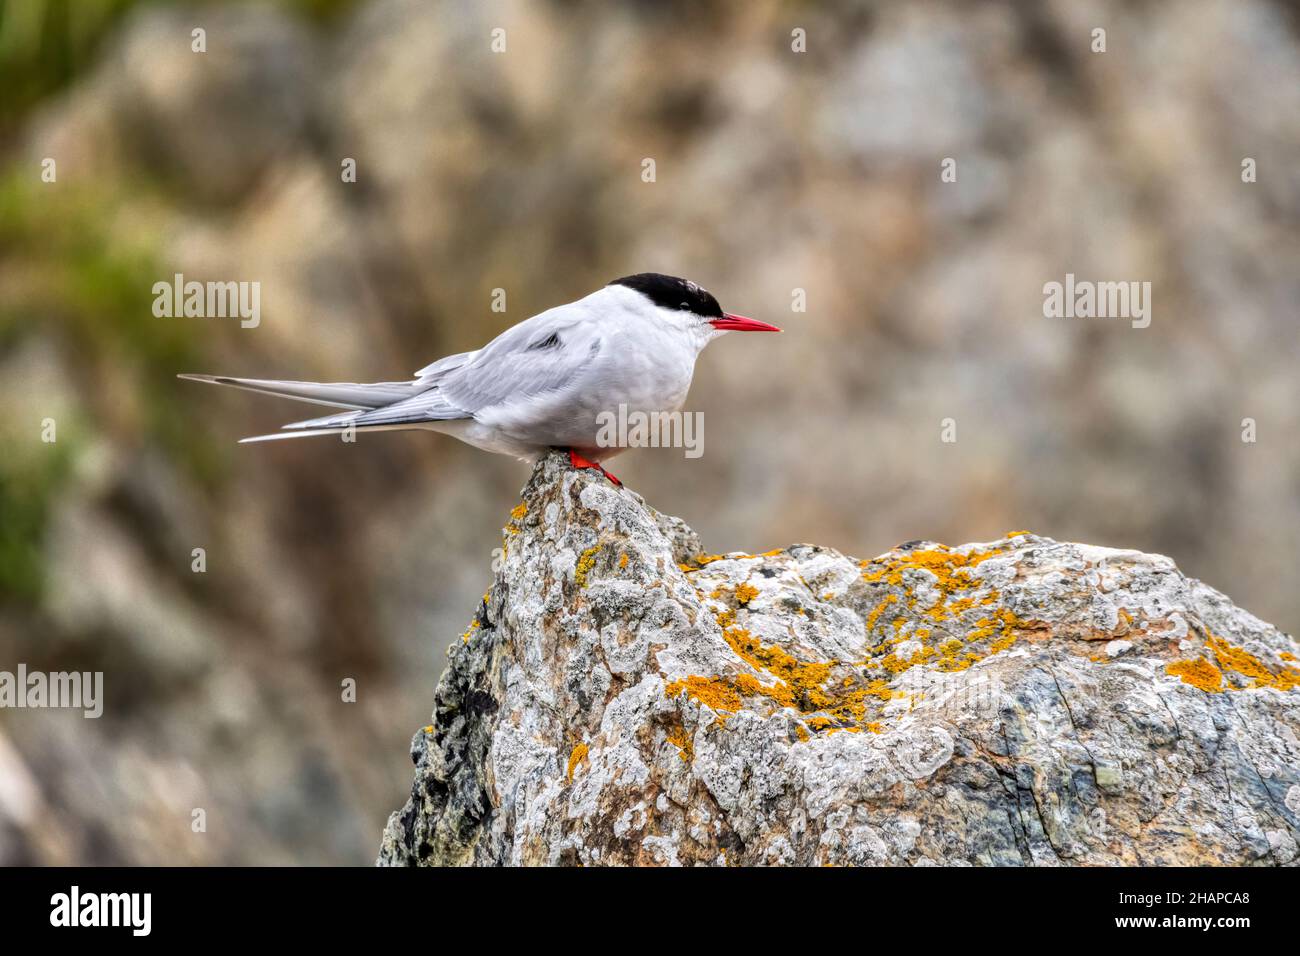 An Arctic tern, Sterna paradisaea, perched on a rock in the Shetland Islands. Stock Photo